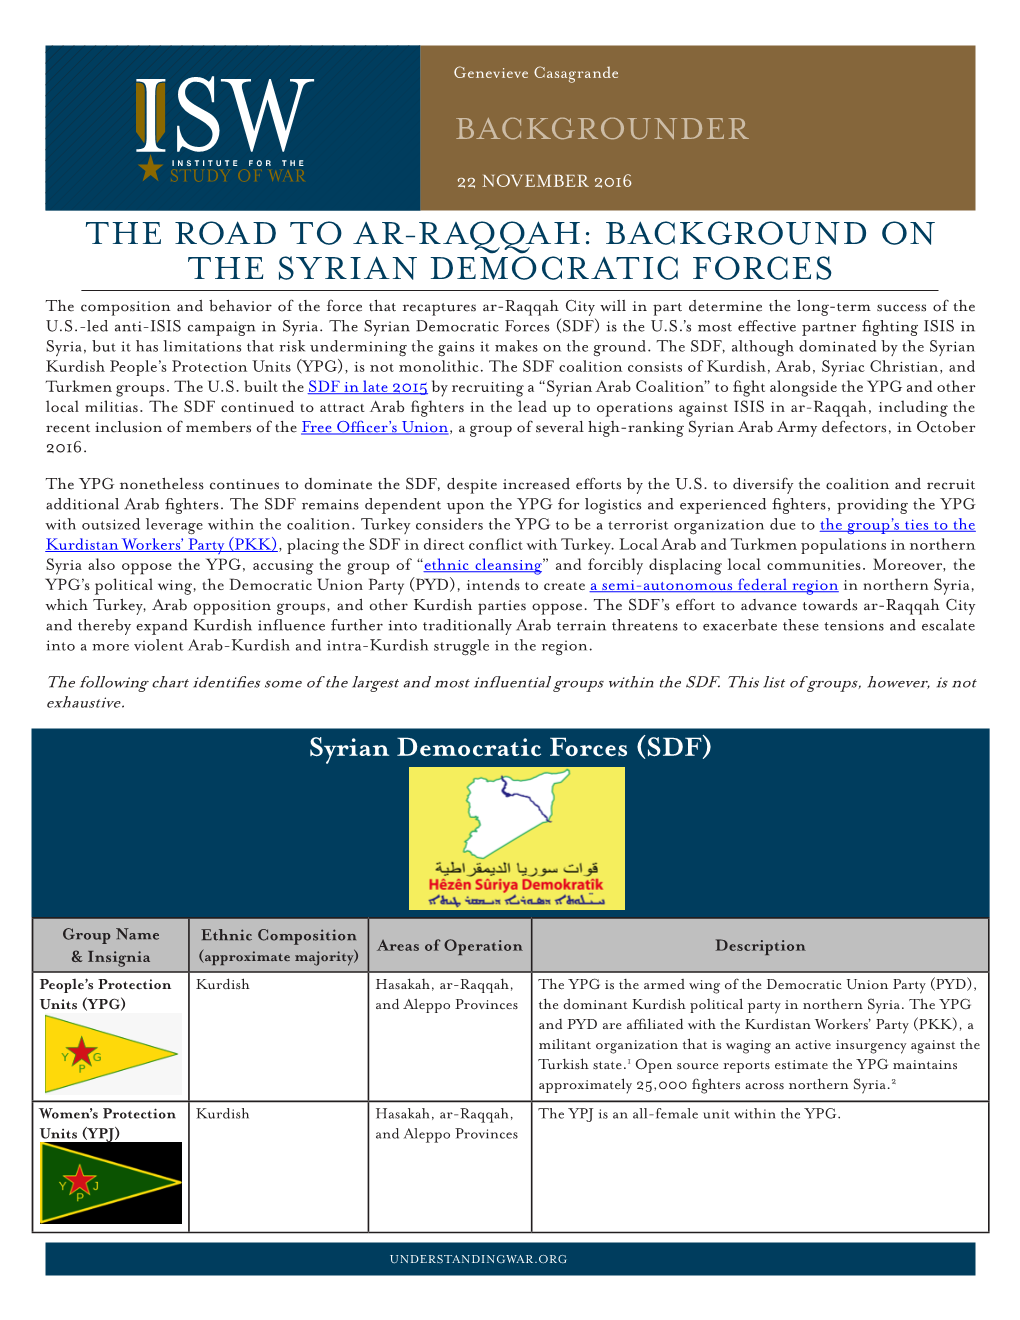 The Road to Ar-Raqqah: Background on the Syrian